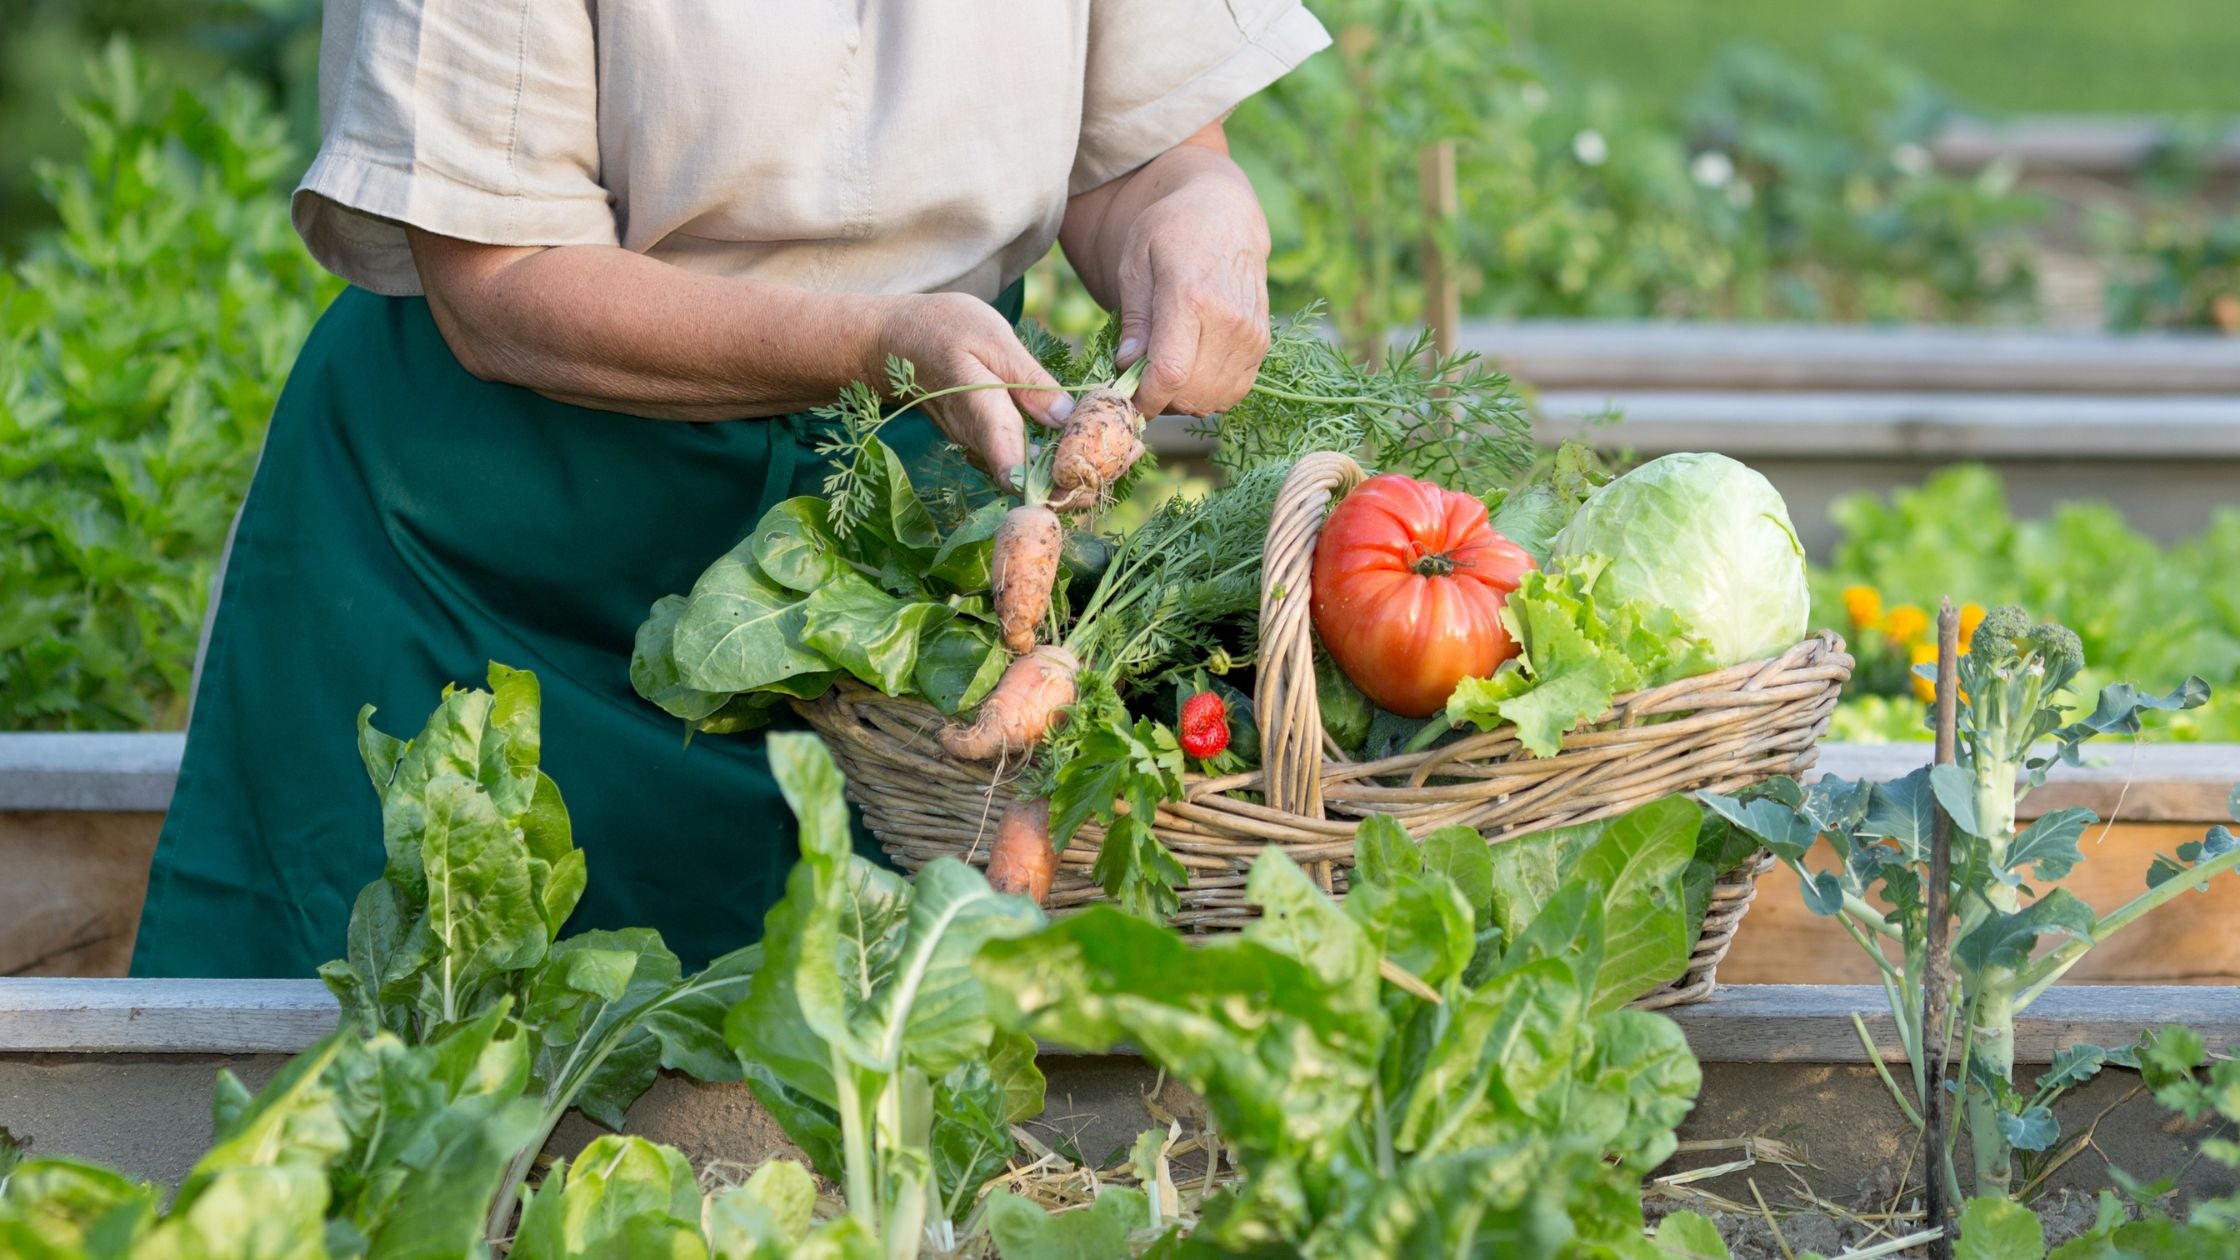 Health and wellbeing benefits of growing your own food